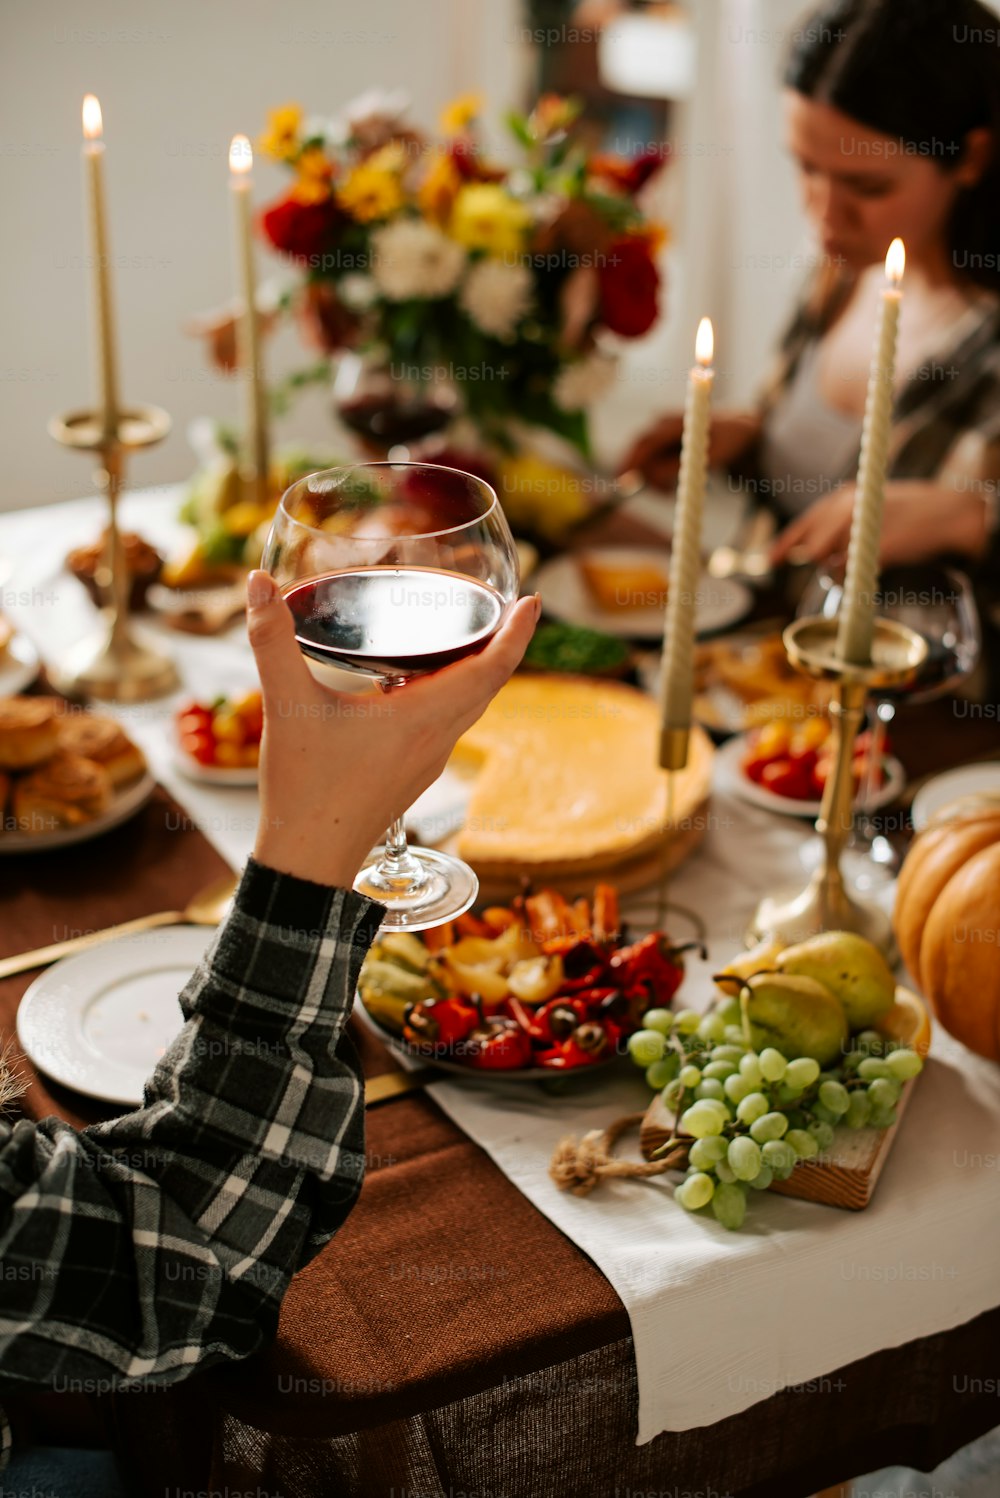 a woman holding a glass of wine in front of a table full of food